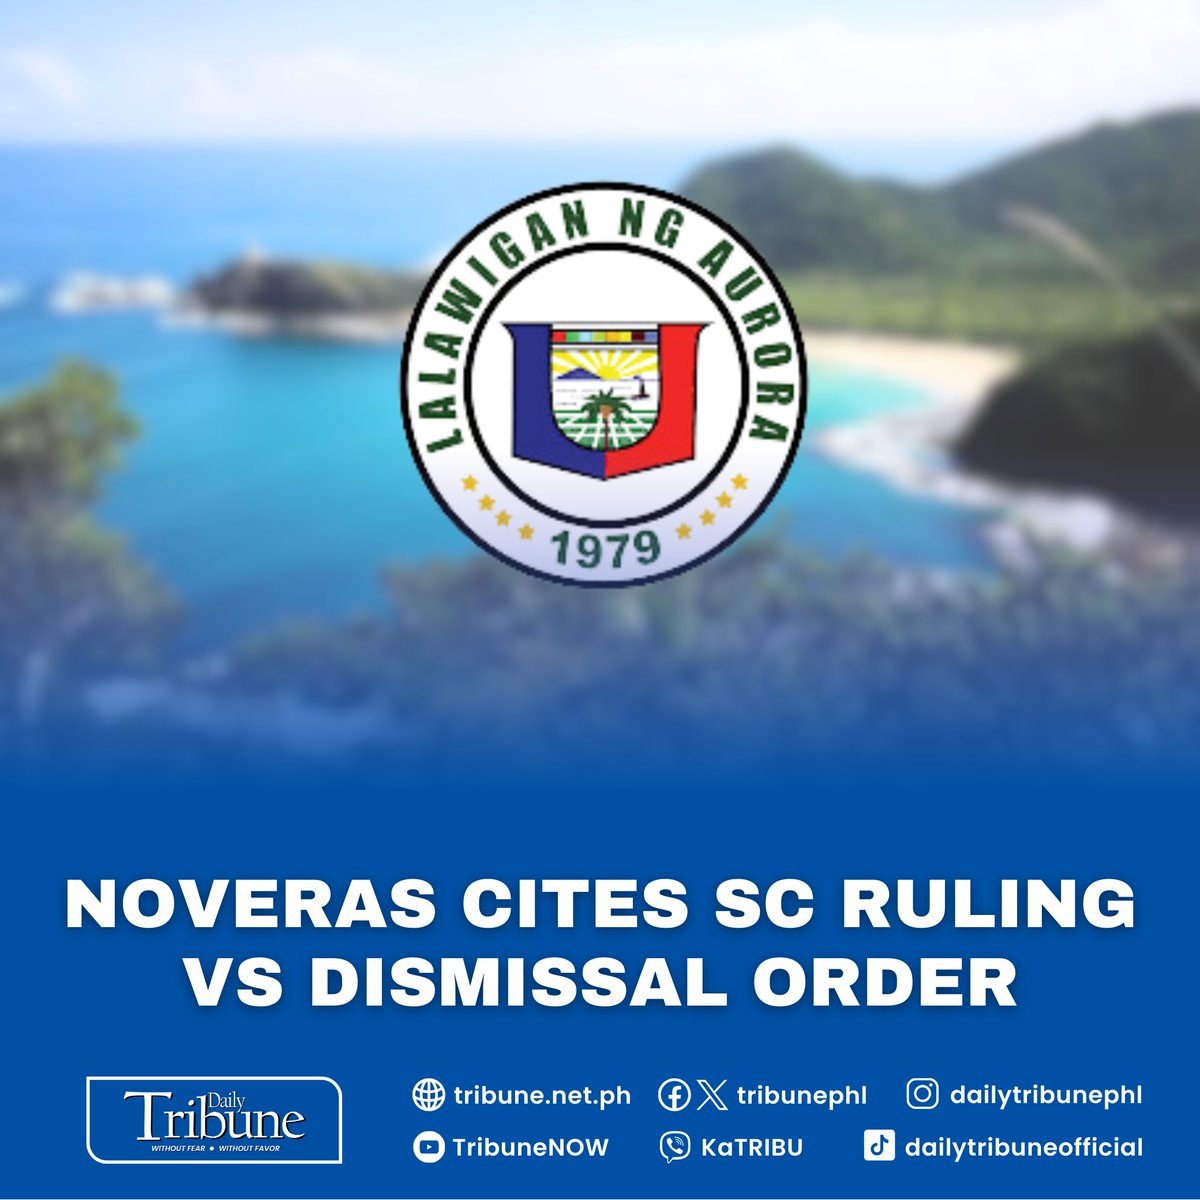 A Supreme Court ruling negates the arguments that the Ombudsman has used in its dismissal order against former Aurora province officials, Gerardo Noveras and Christian Noveras said Tuesday. Read more at: tribune.net.ph/2024/05/14/nov…